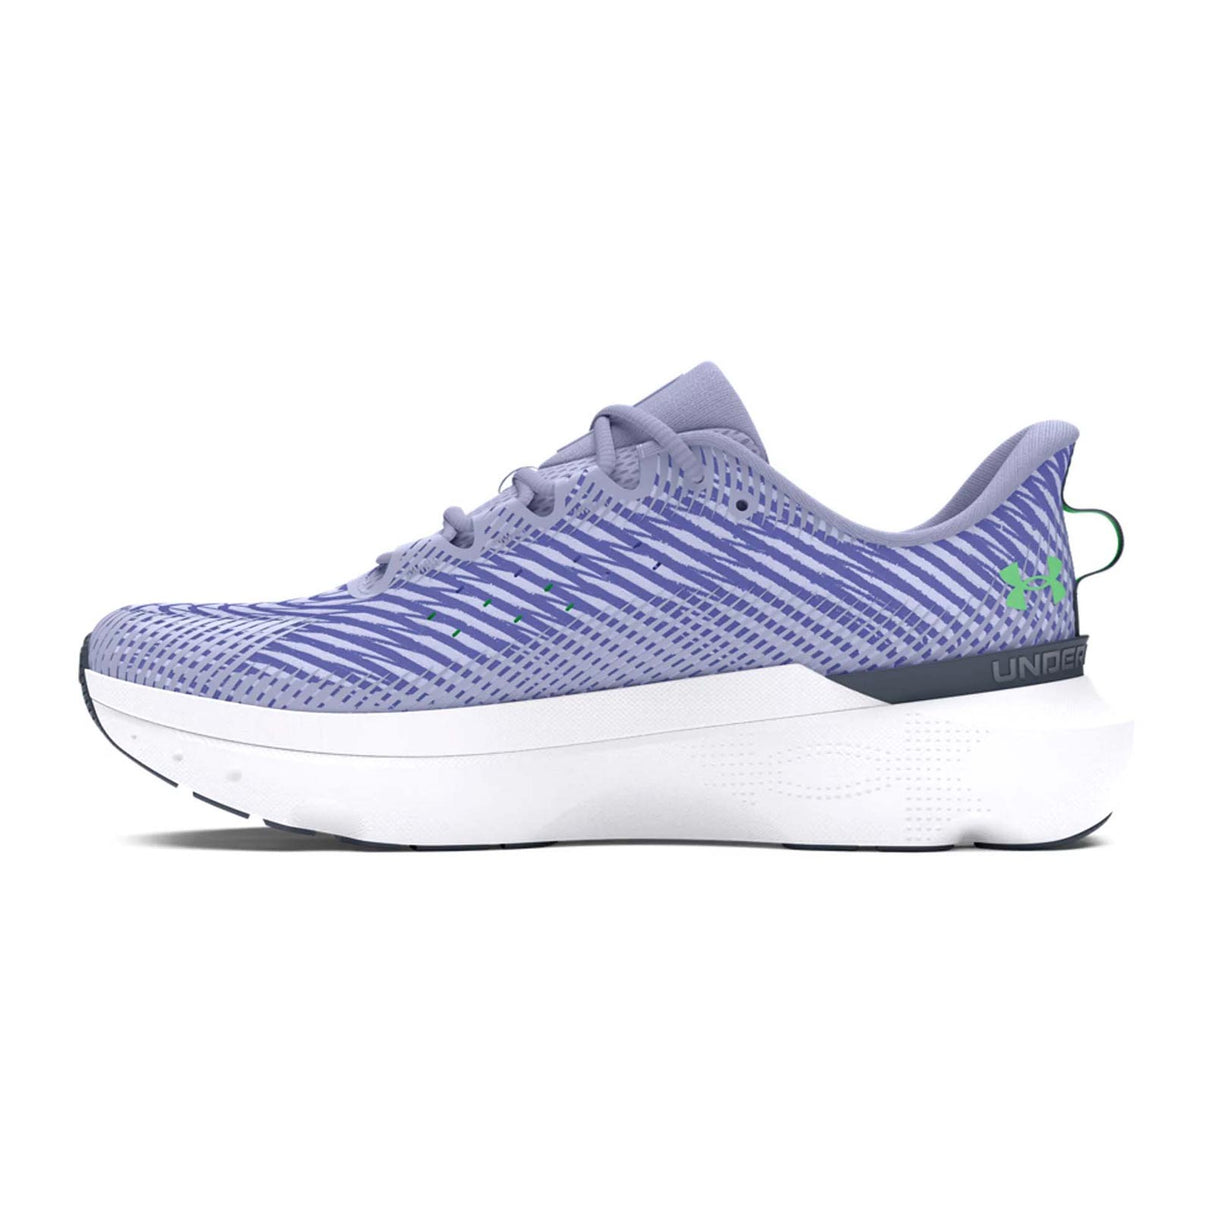 Under Armour Infinite Pro Womens Running Shoes